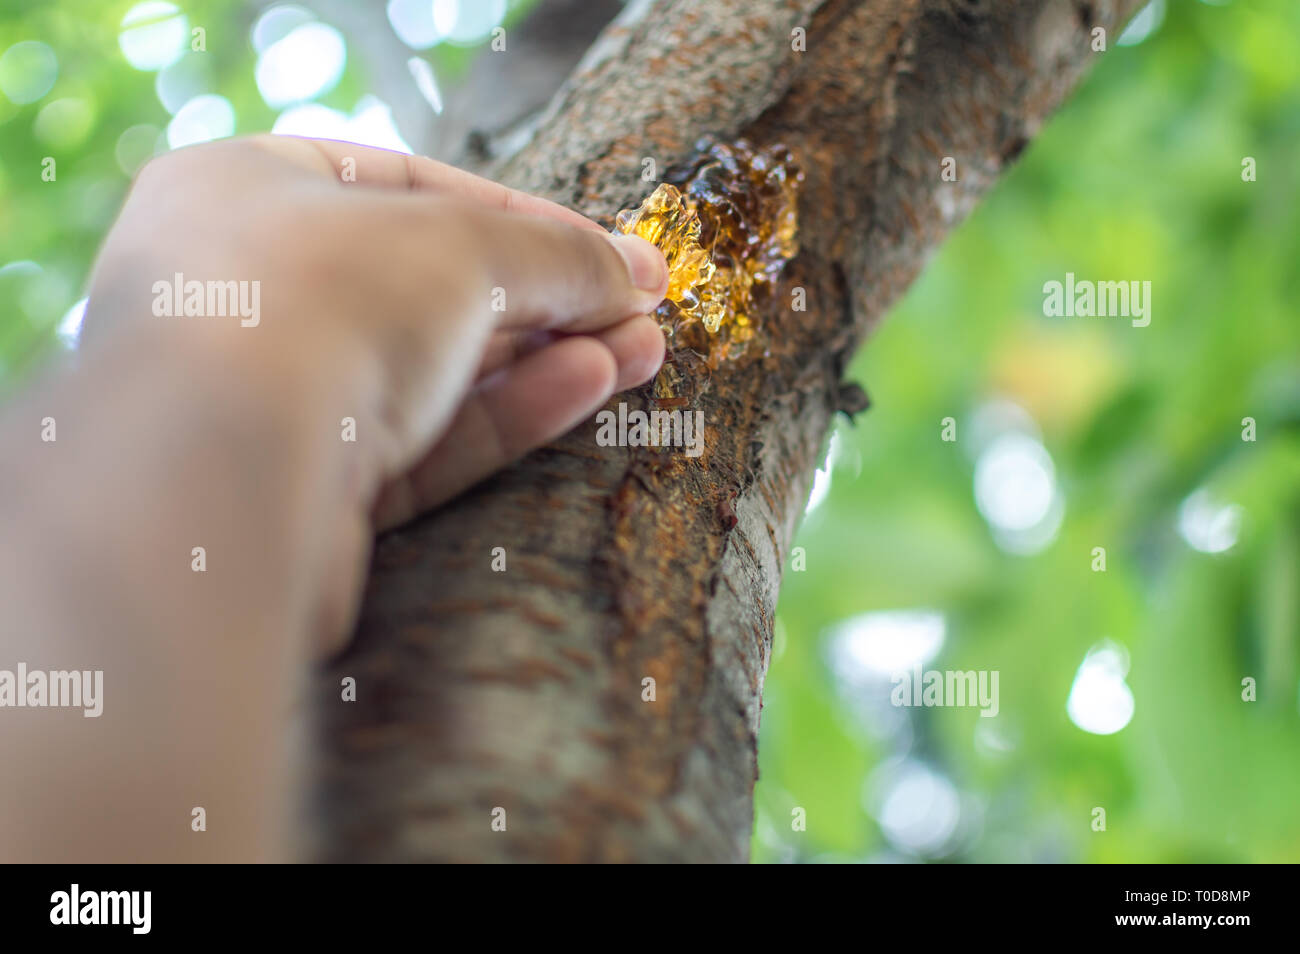 A person plucking resins gum sap from the bark of a cherry tree Stock Photo